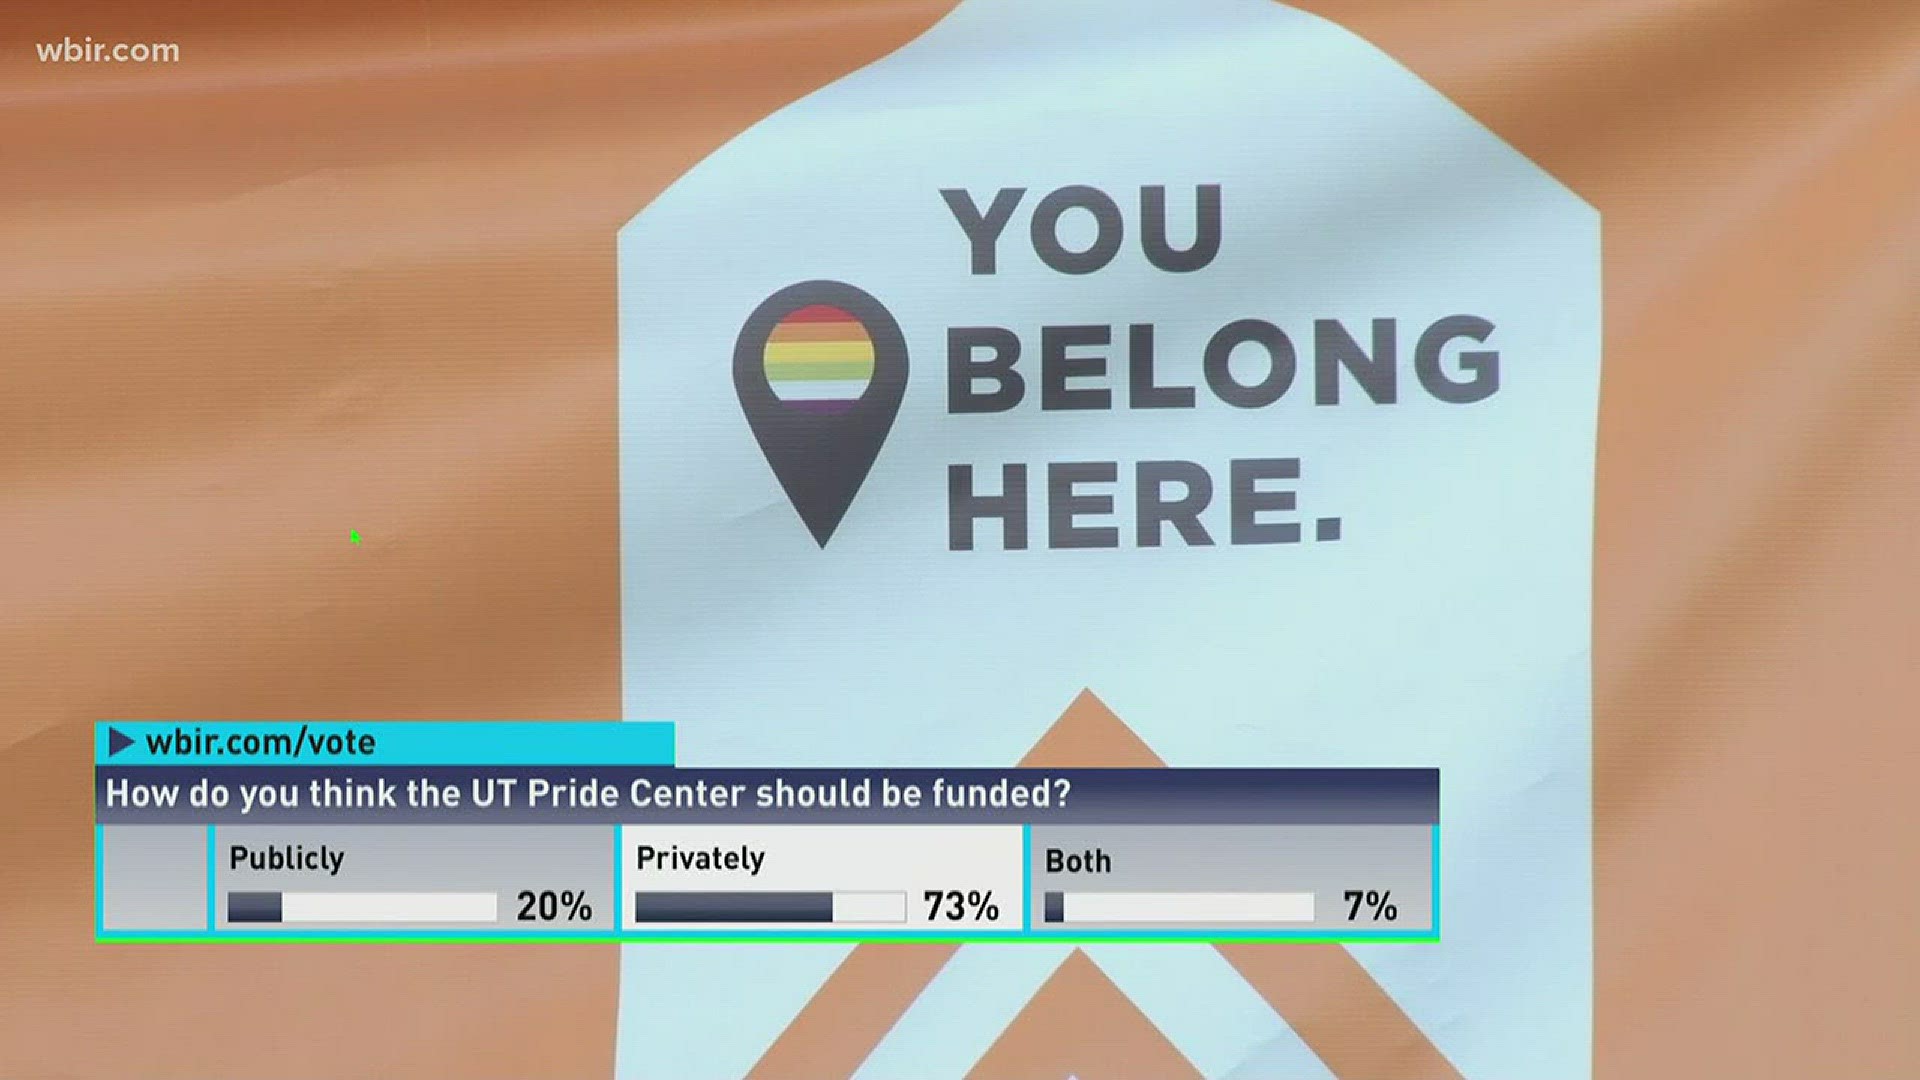 Jan. 25, 2018: A new effort by University of Tennessee graduate aims to fund the UT Pride Center using only private money.